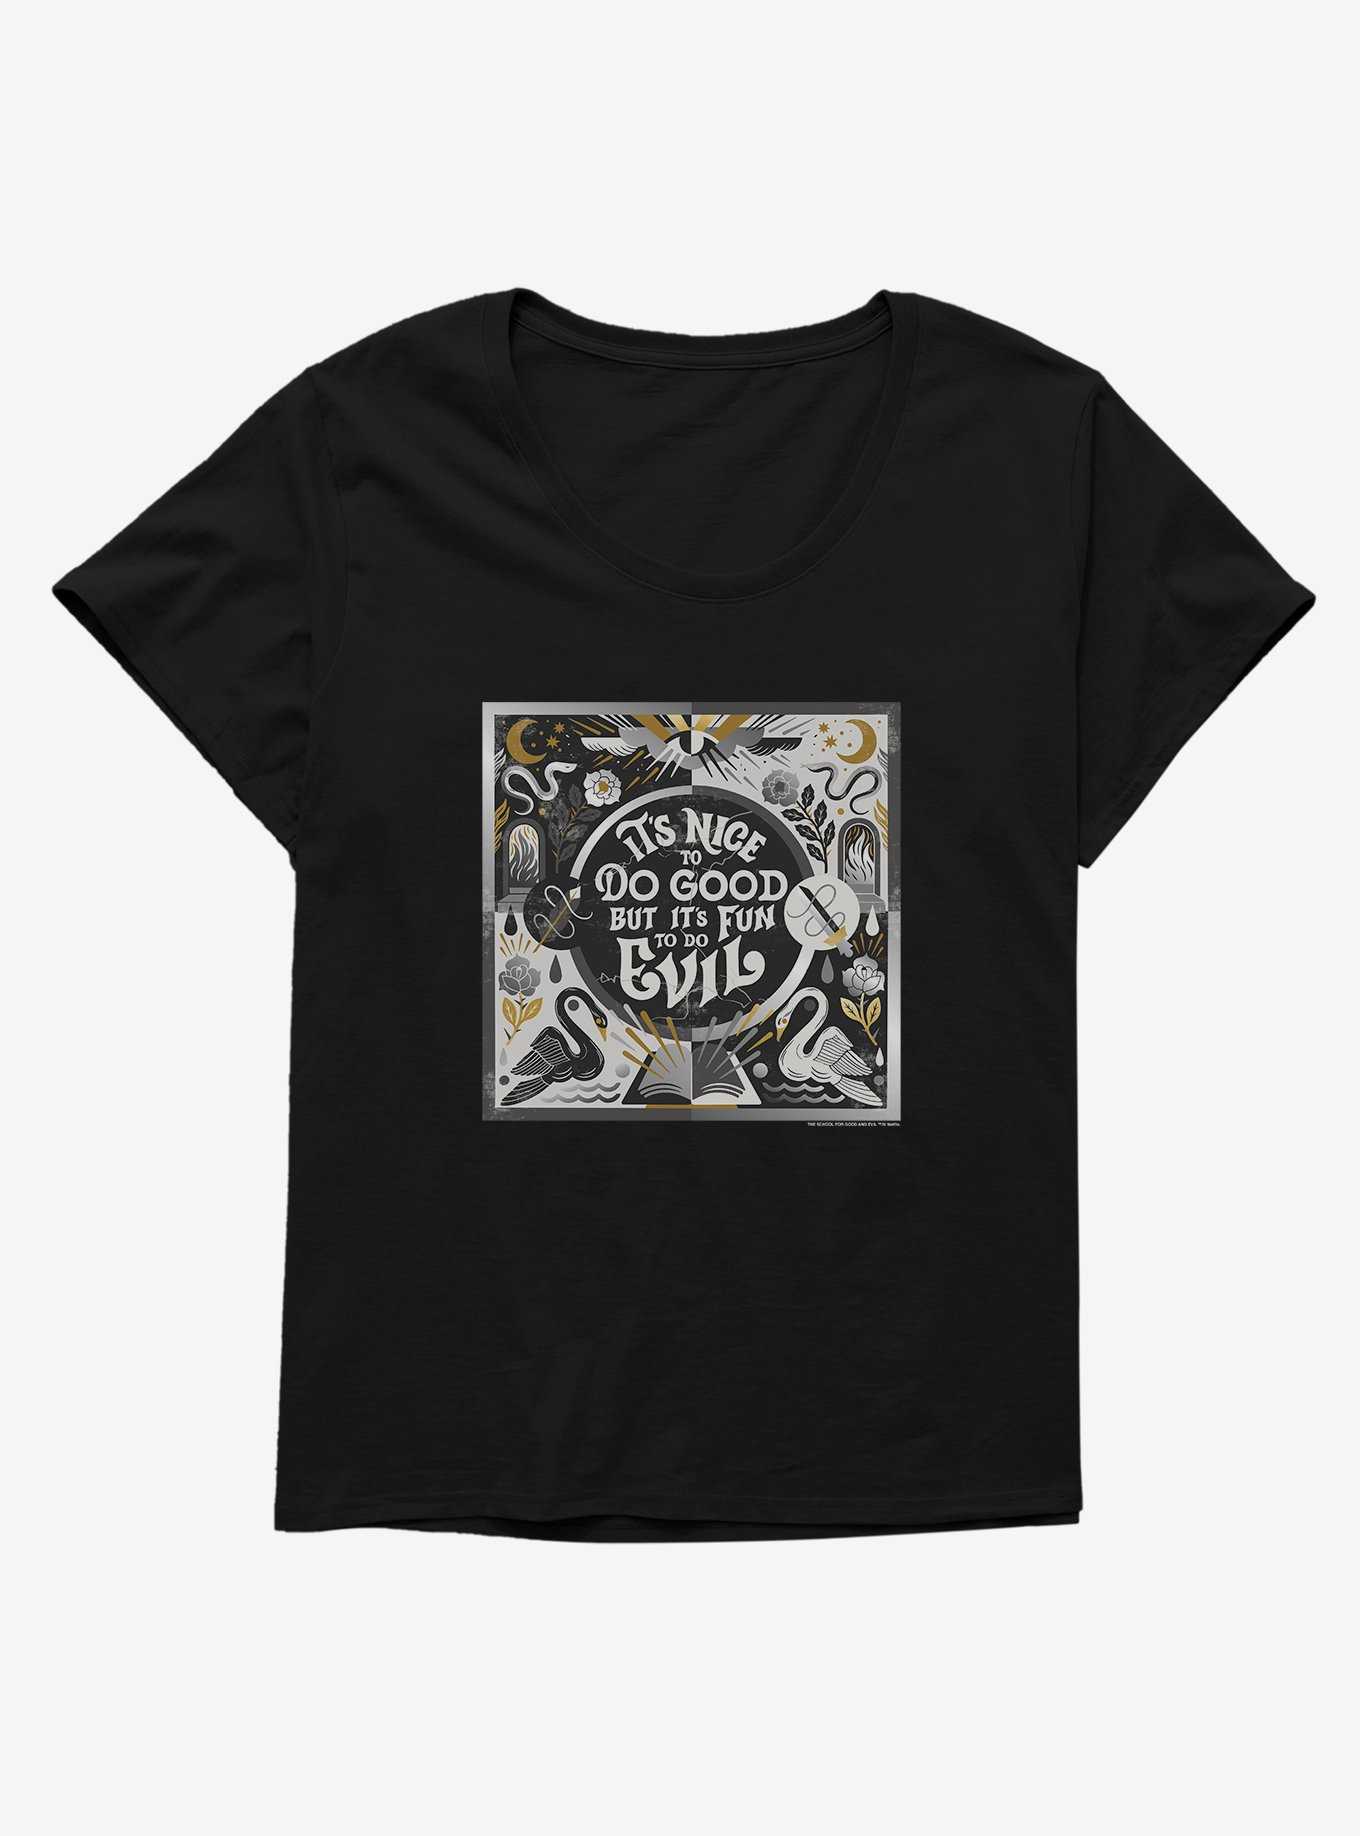 The School For Good And Evil Nice, But Fun Girls T-Shirt Plus Size, , hi-res